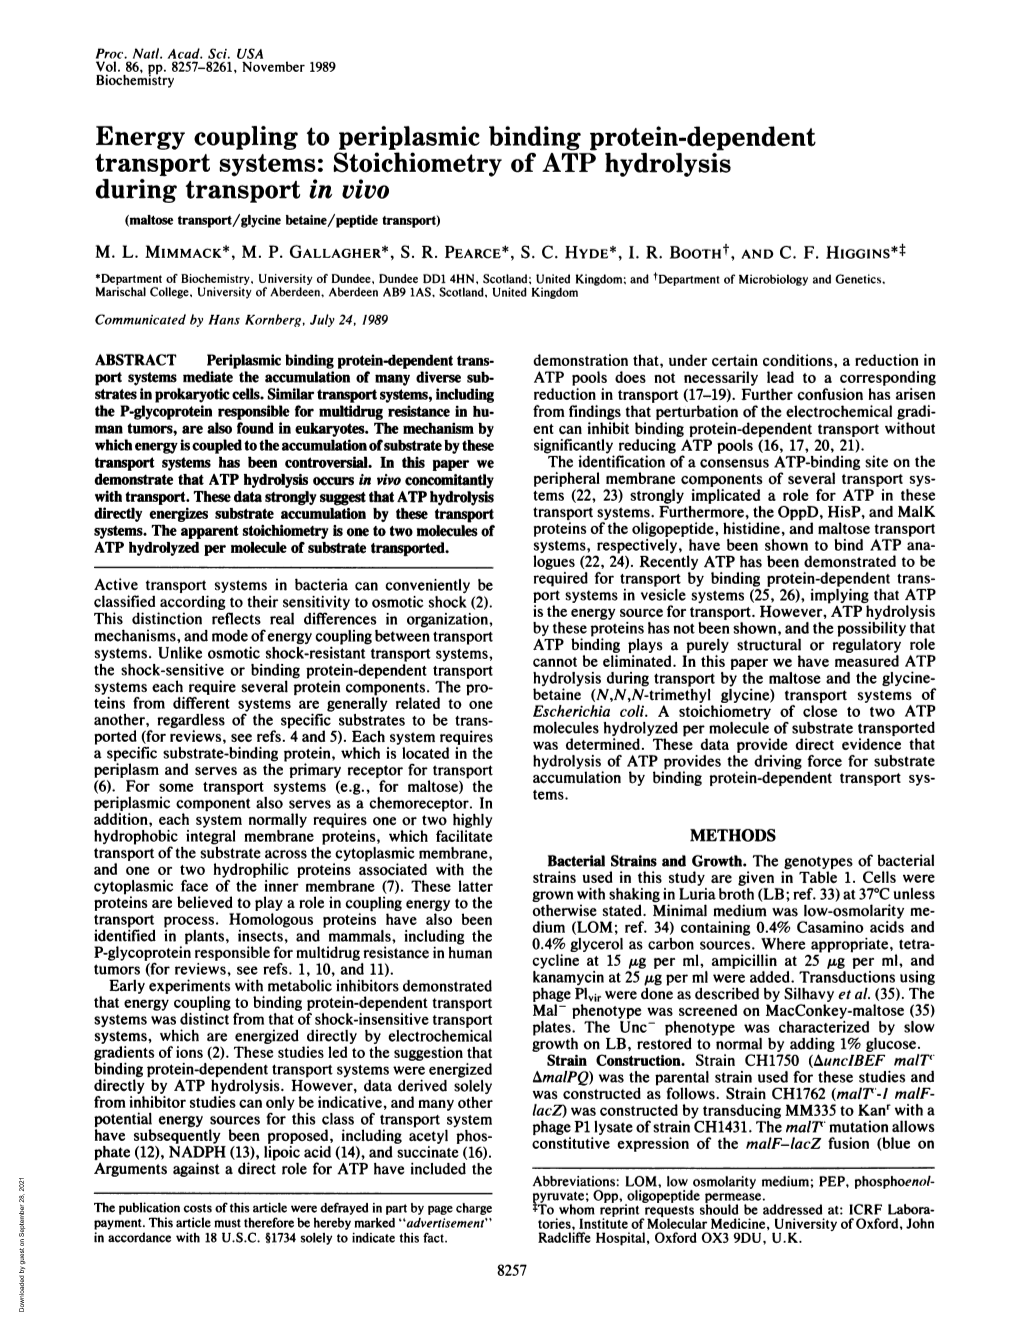 Stoichiometry of ATP Hydrolysis During Transport in Vivo (Maltose Transport/Glycine Betaine/Peptide Transport) M